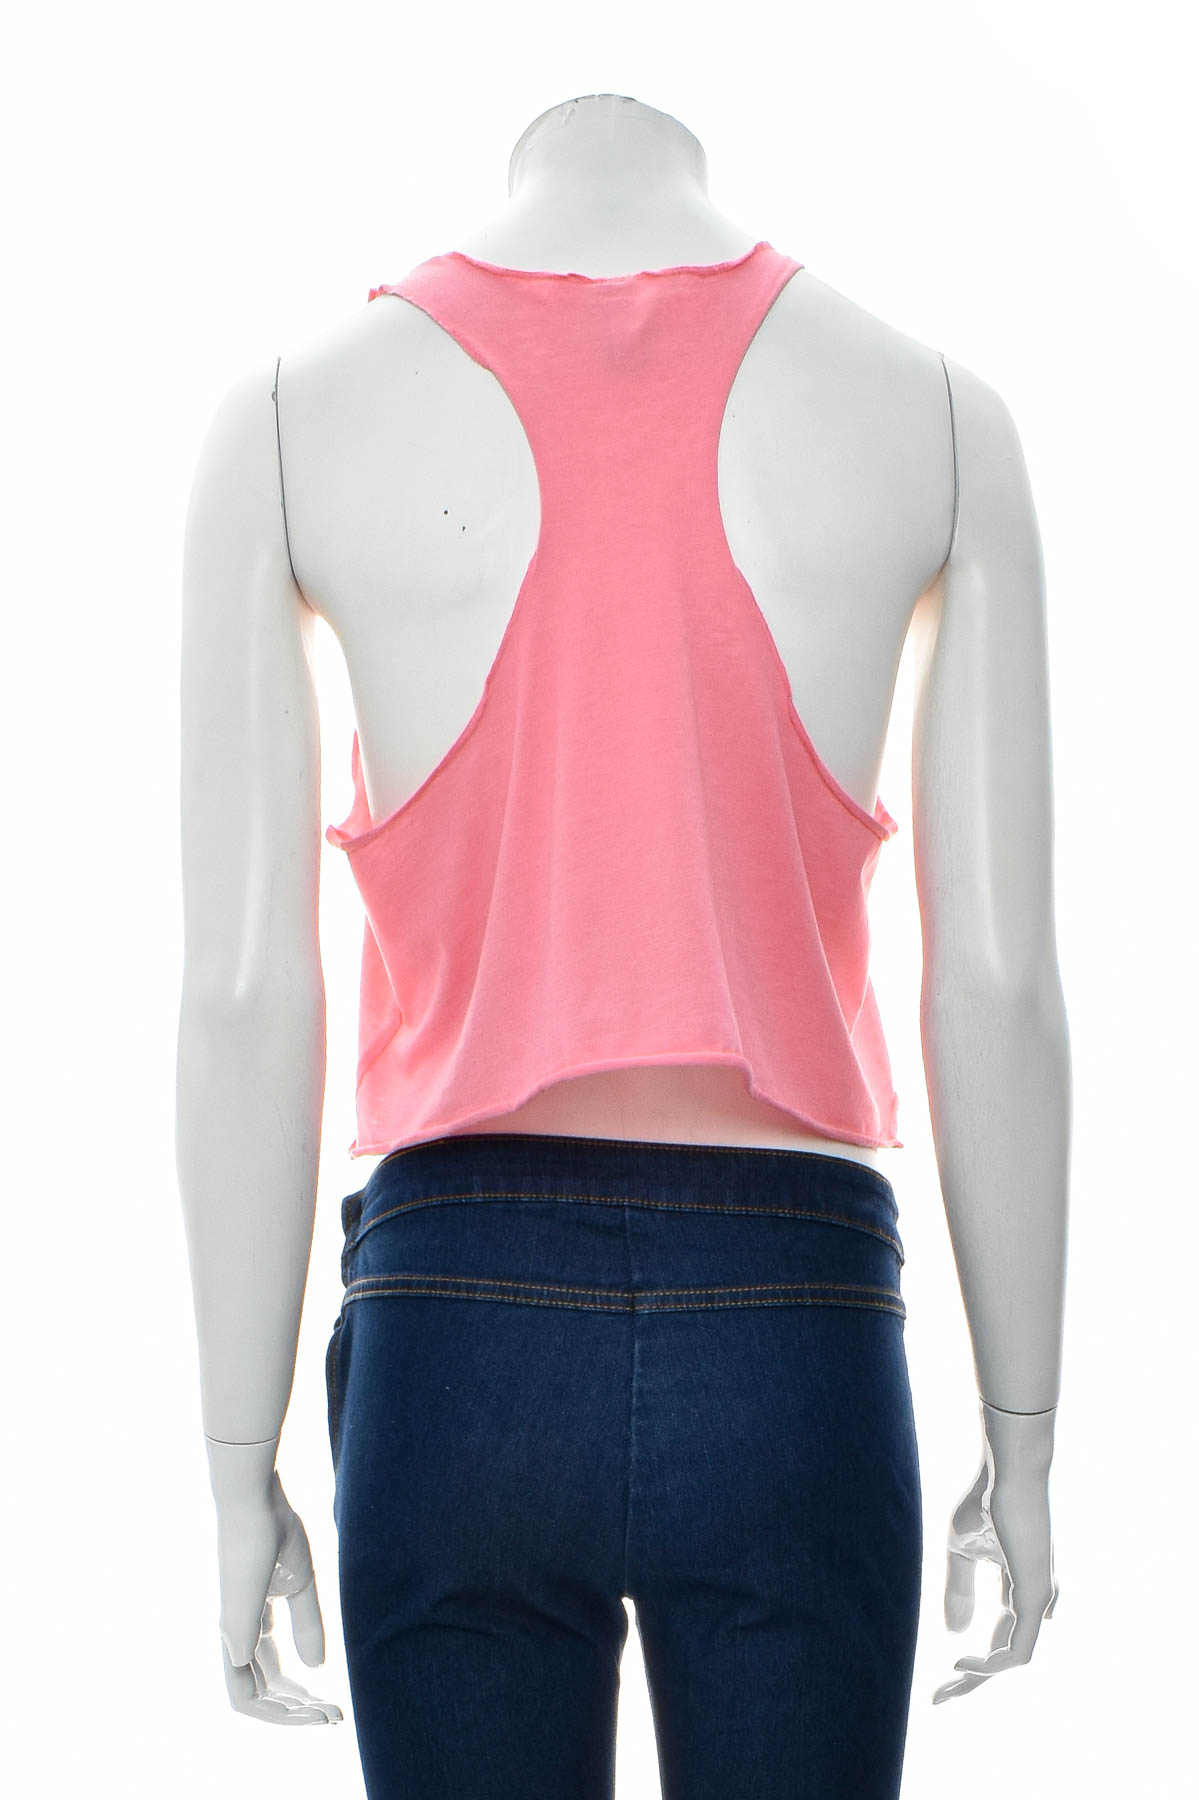 Women's top - DIVIDED - 1